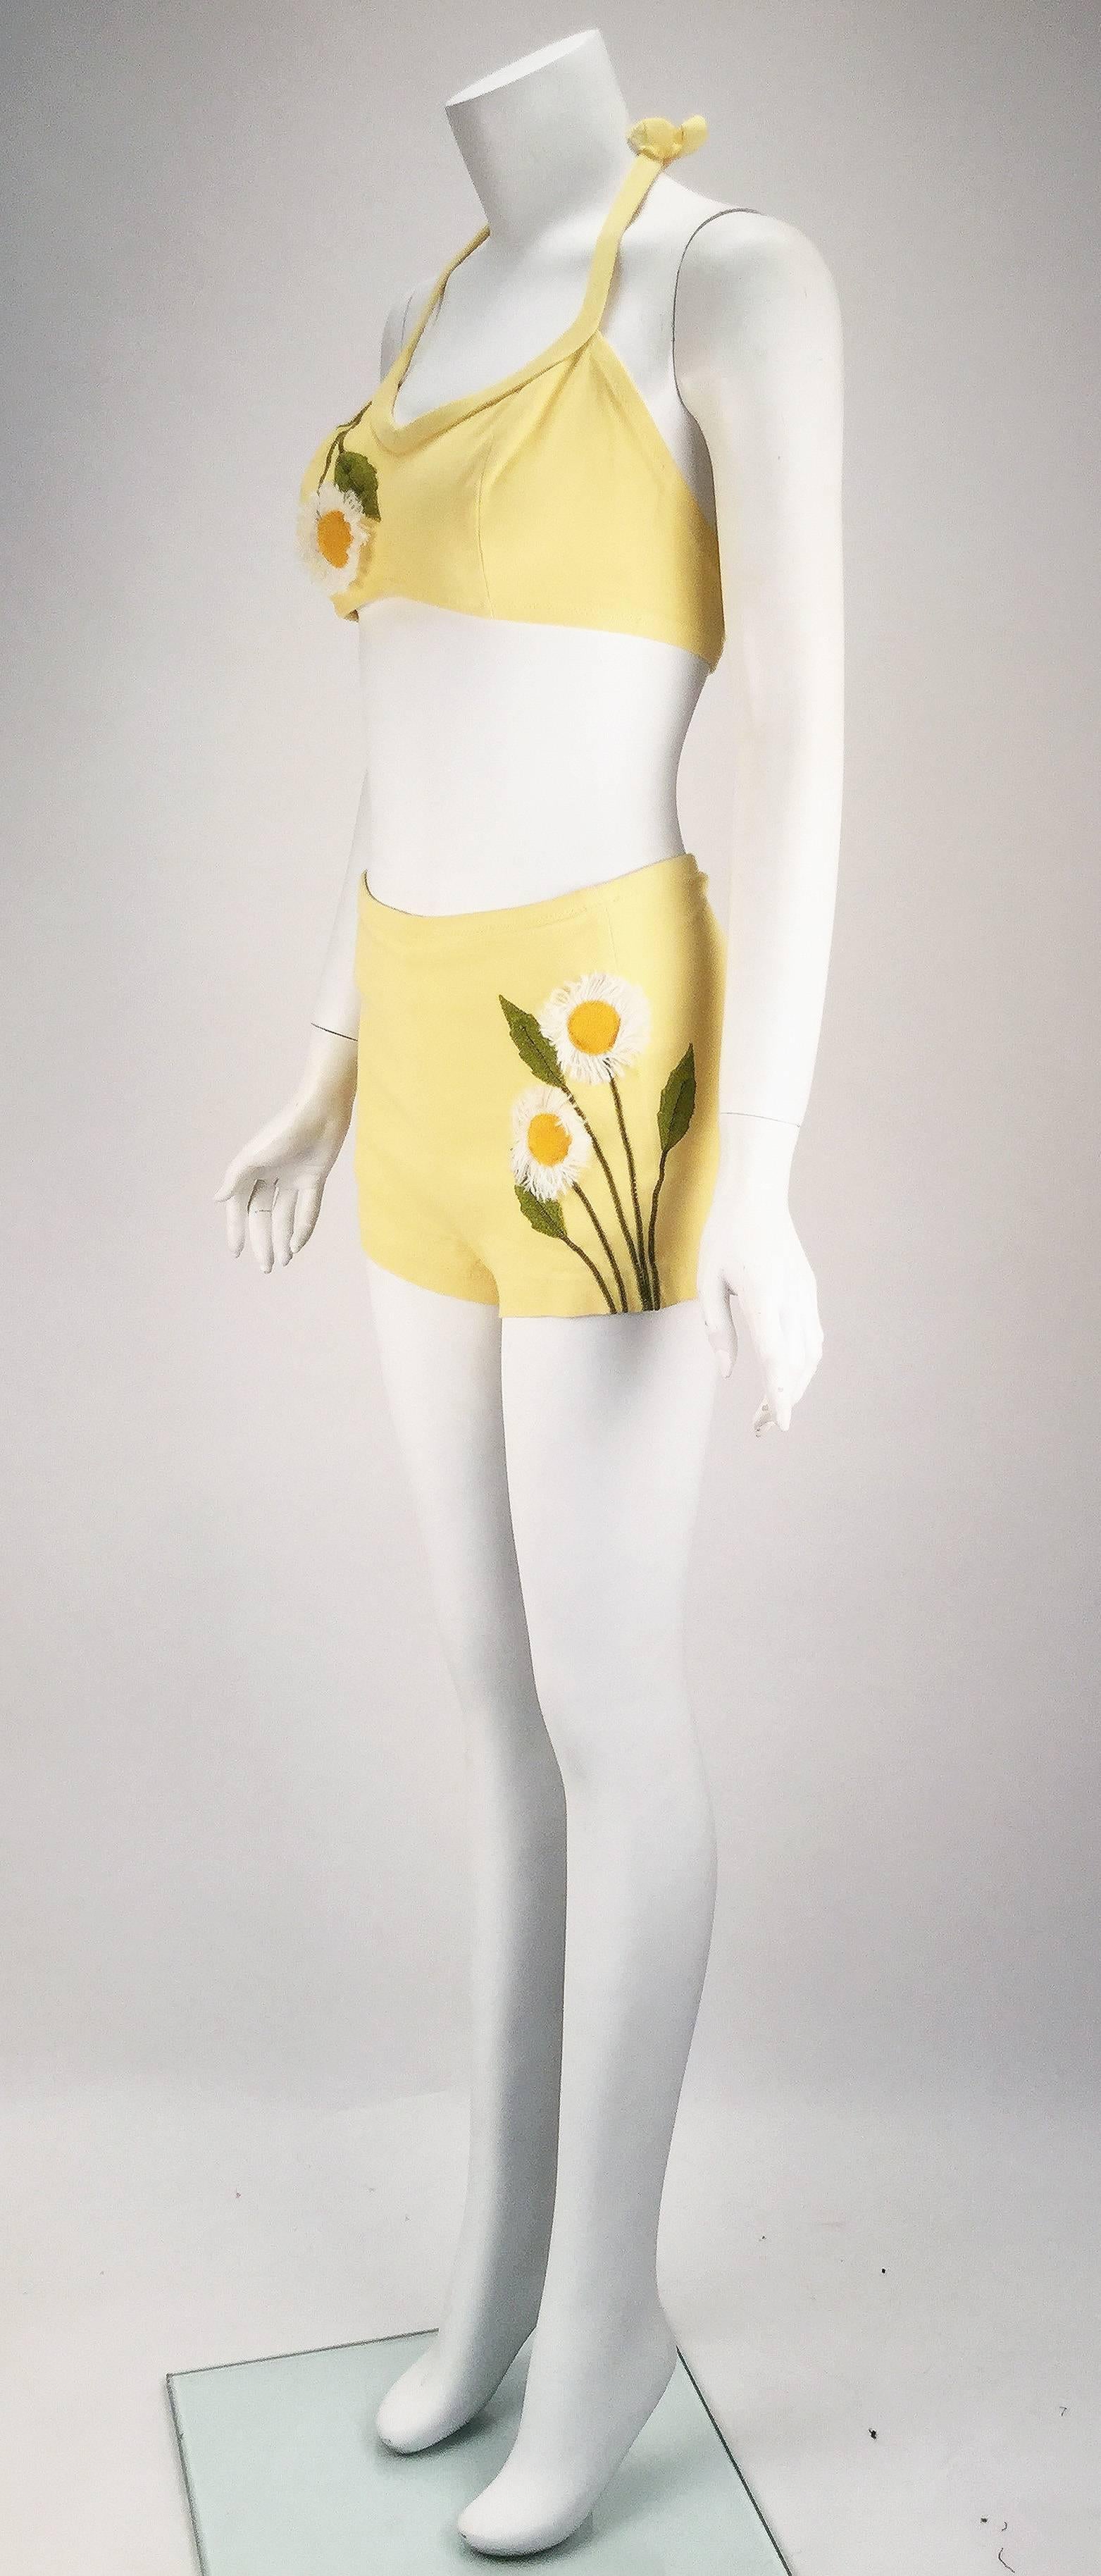 Get ready for a day on the beach while wearing this darling 1950s DeWeese Designs pale yellow bikini with daisy appliques. The bikini top has princess seams and a center front seam. Zig-zag stitch hems. Daisy applique at right bust area. There are